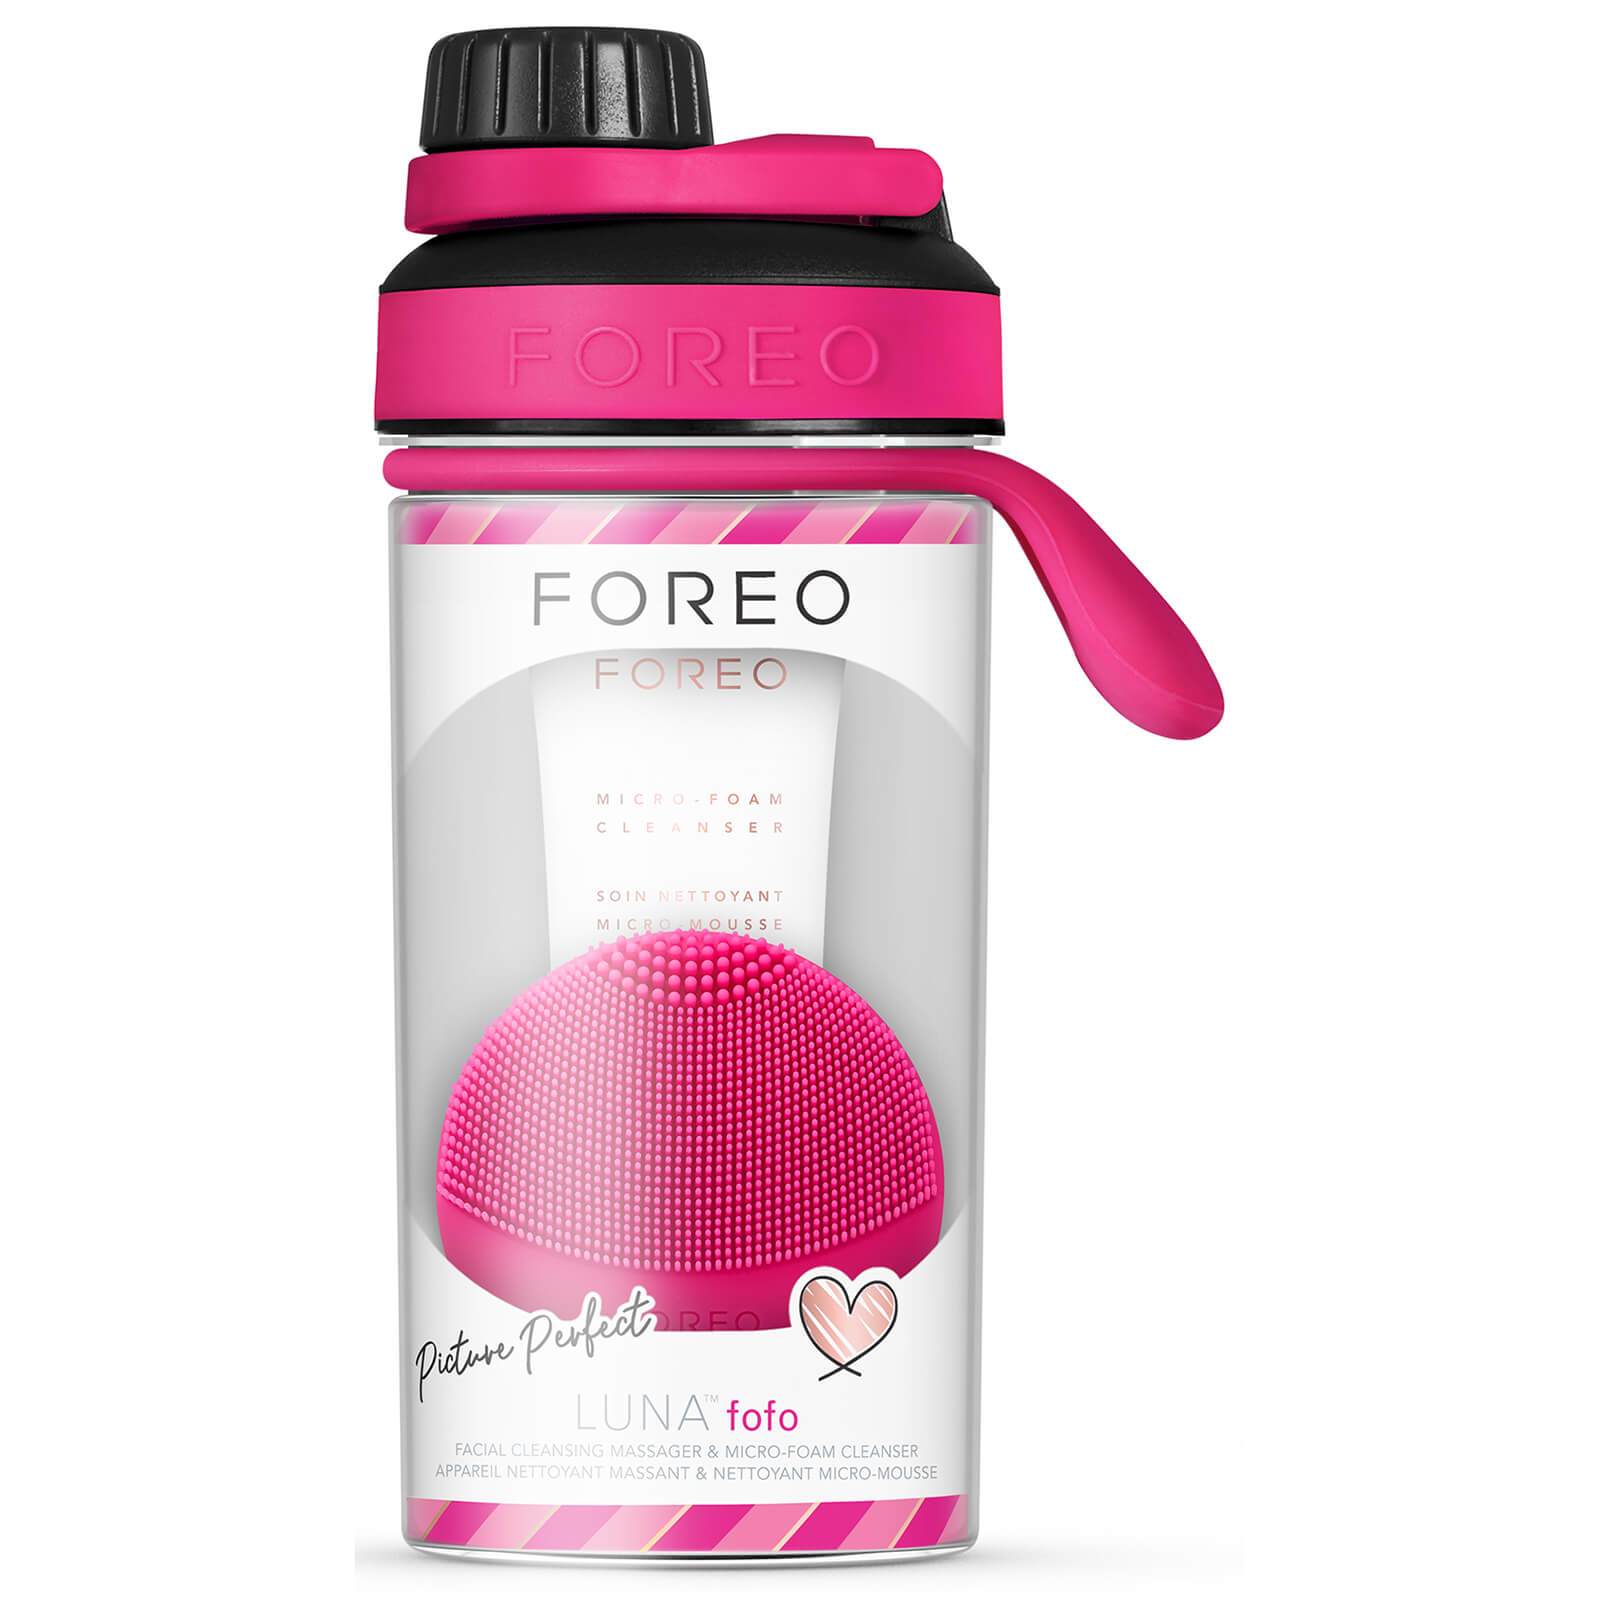 FOREO LUNA Fofo Picture Perfect Set | OZ Hair & Beauty